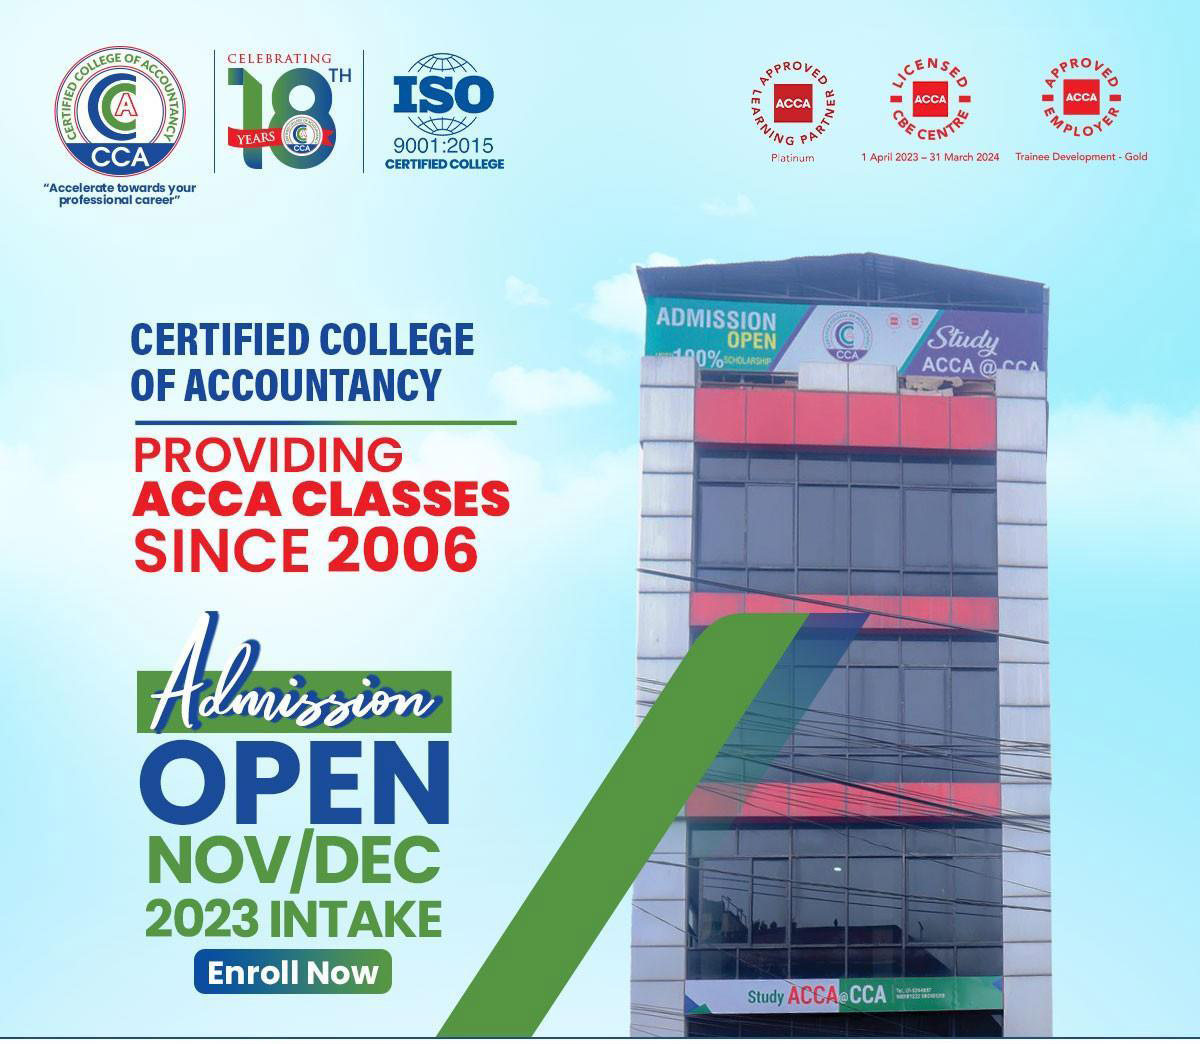 Admission Open For ACCA at the Certified College of Accountancy